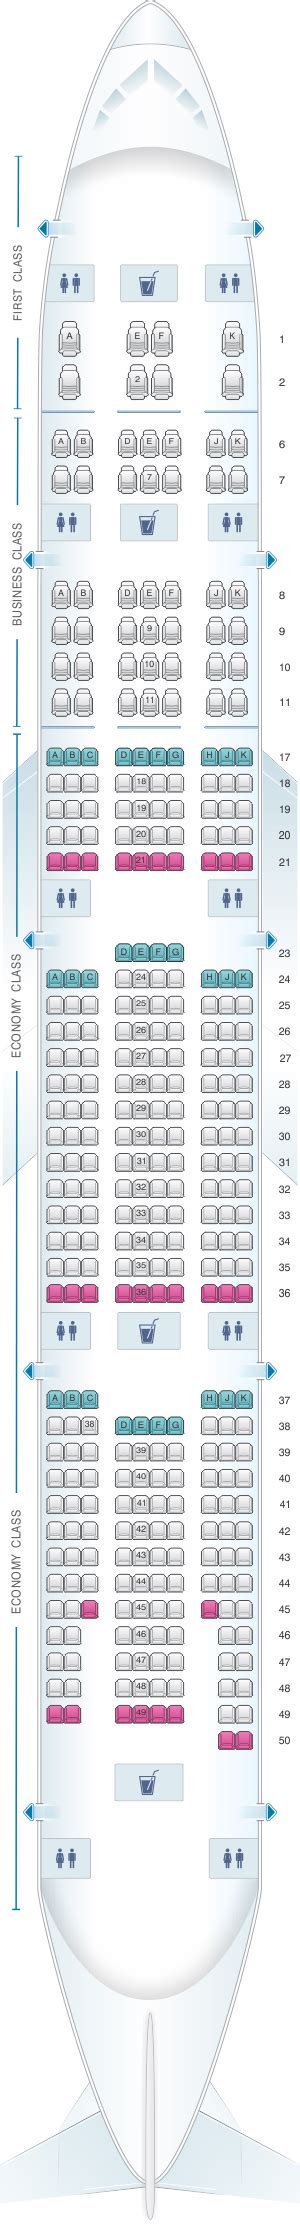 Seat Map Emirates Boeing B777 300er Three Class Private Suite Best